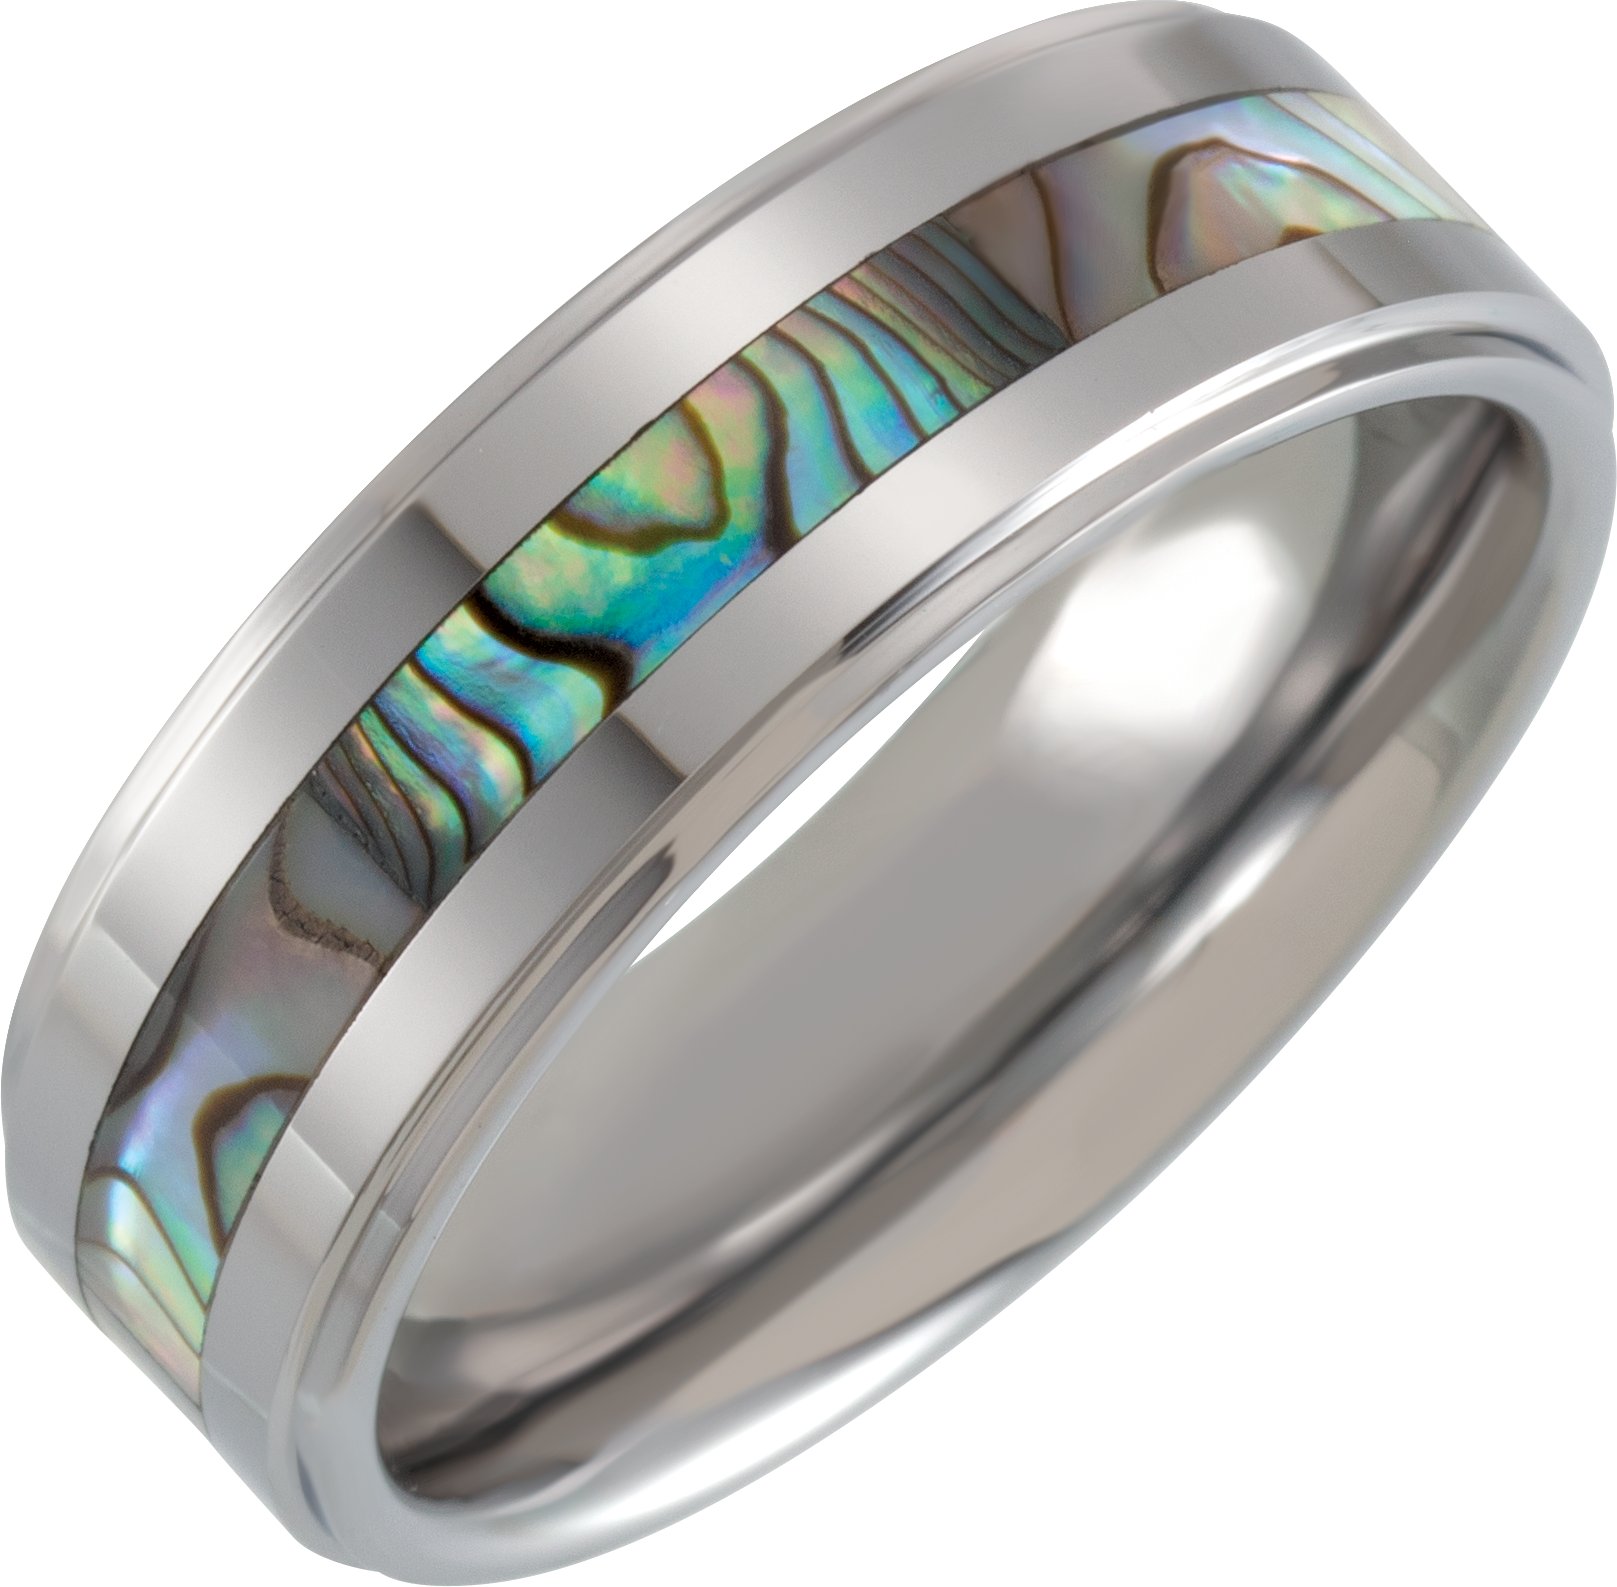 Tungsten 8 mm Flat Stepped Band with Mother of Pearl Inlay Size 12.5